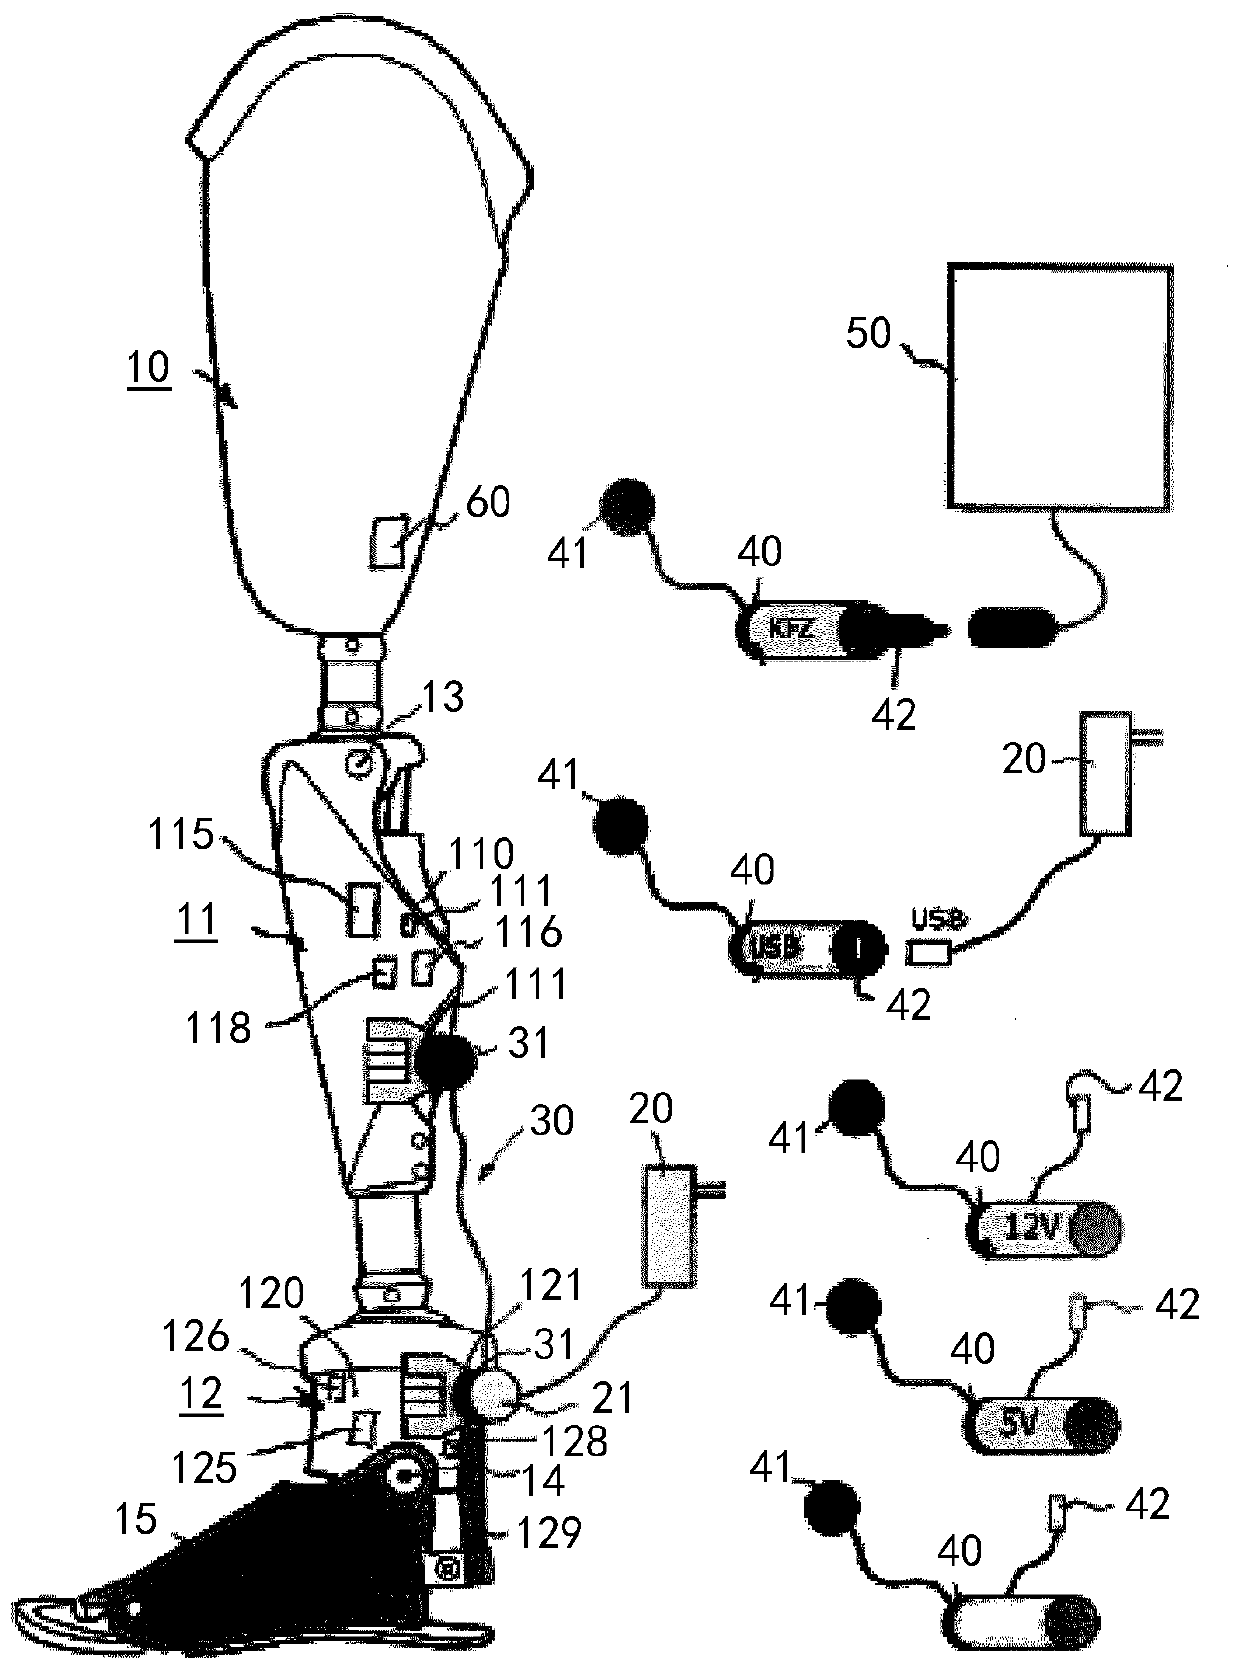 System made up of multiple orthopedic components and method for controlling such a system